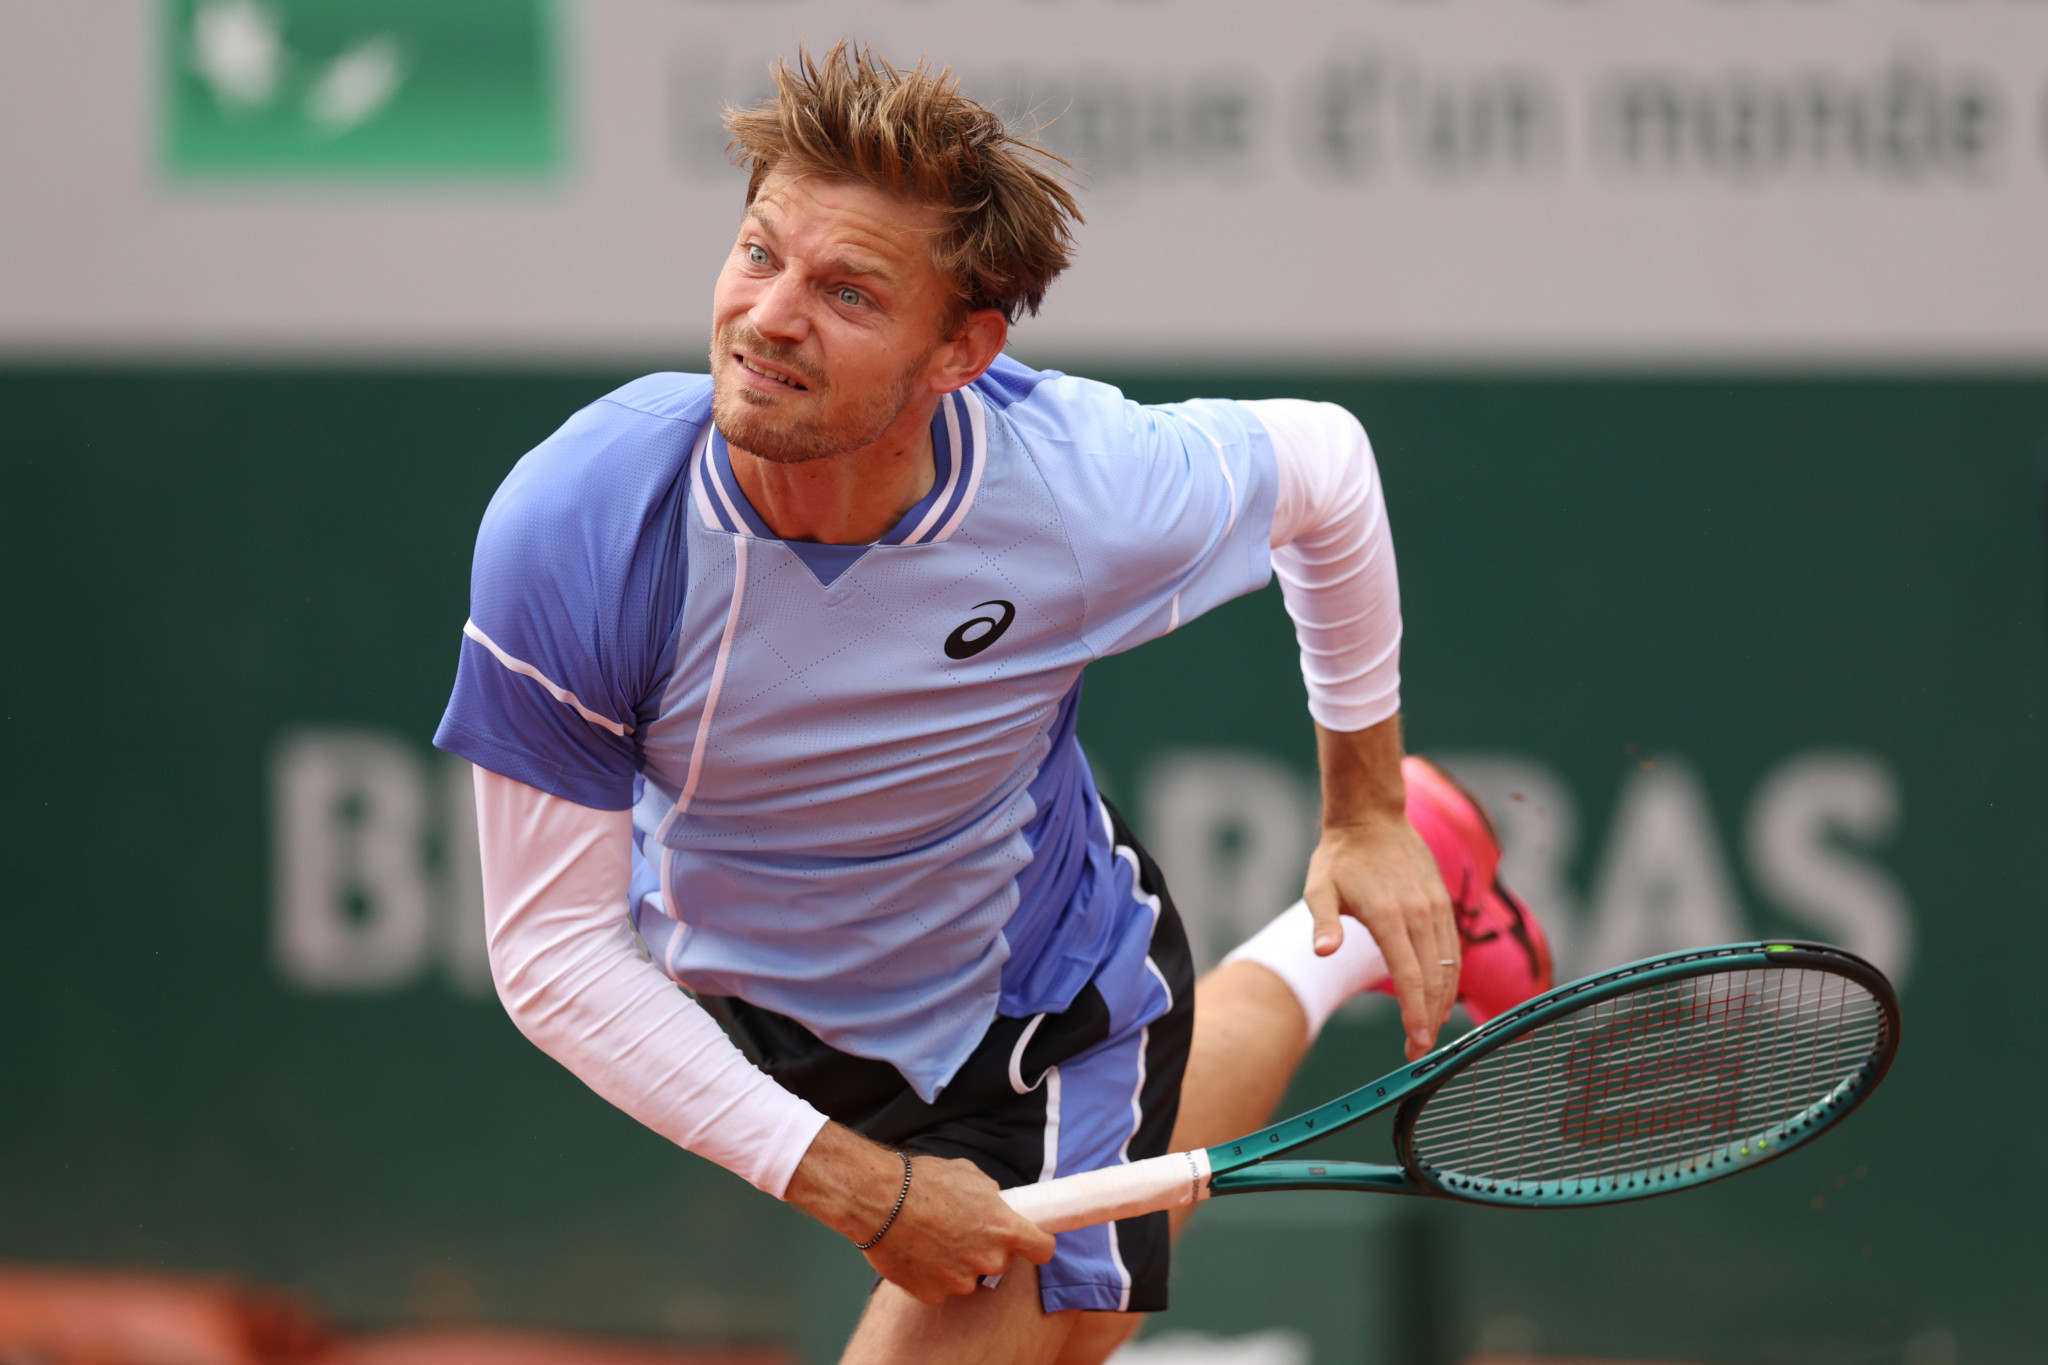 David Goffin was left seething after somebody spat chewing gum in his direction at the French Open. GETTY IMAGES